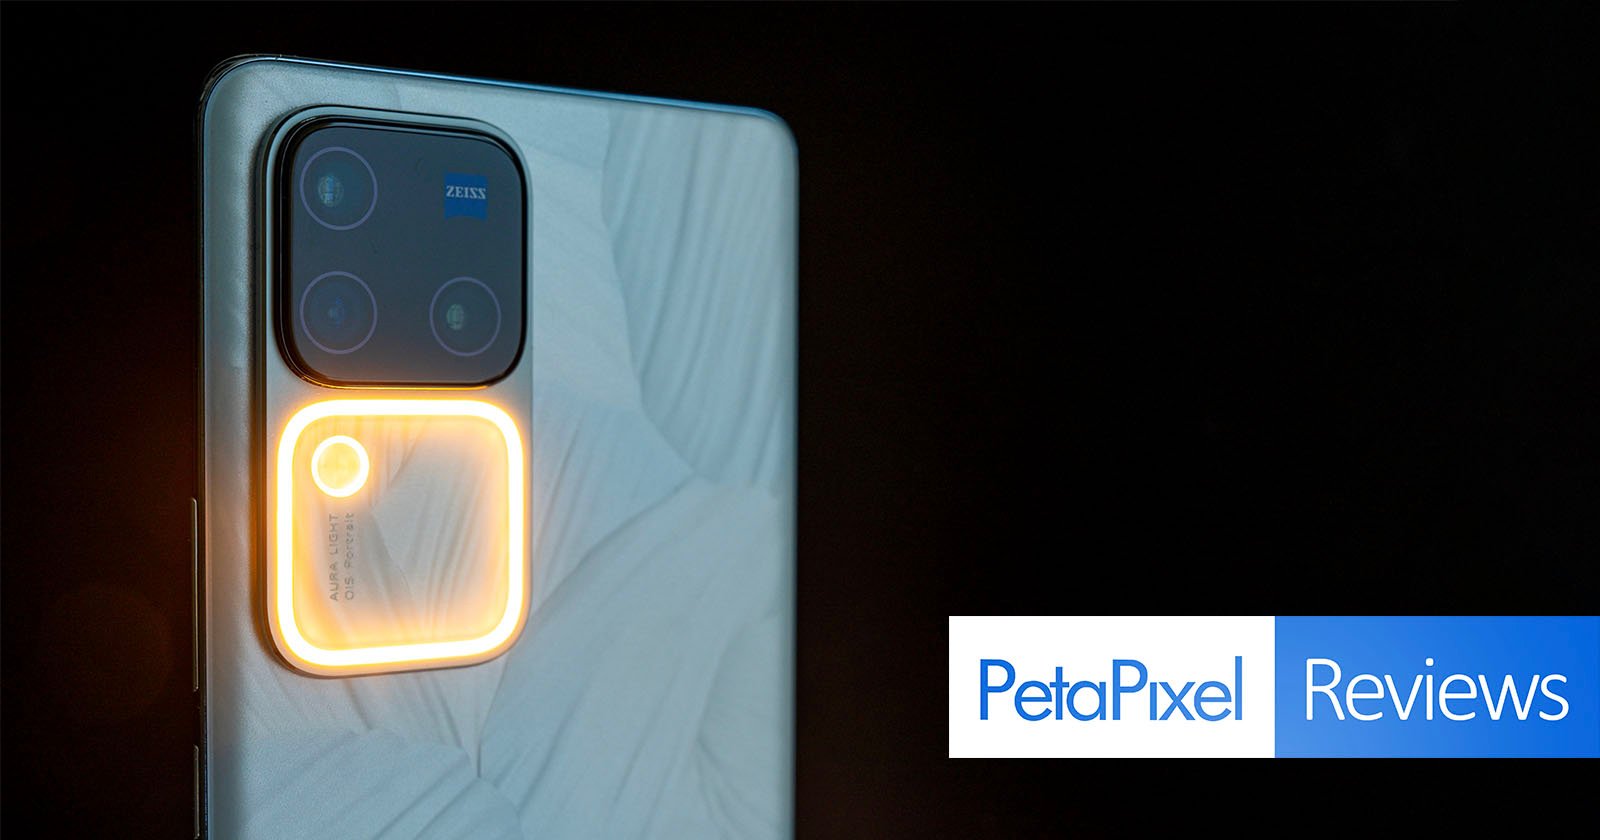 A close-up of a smartphone with a sophisticated camera system, featuring a large lens with a glowing ring light, set against a dark background. the logo "petapixel reviews" is visible in the corner.